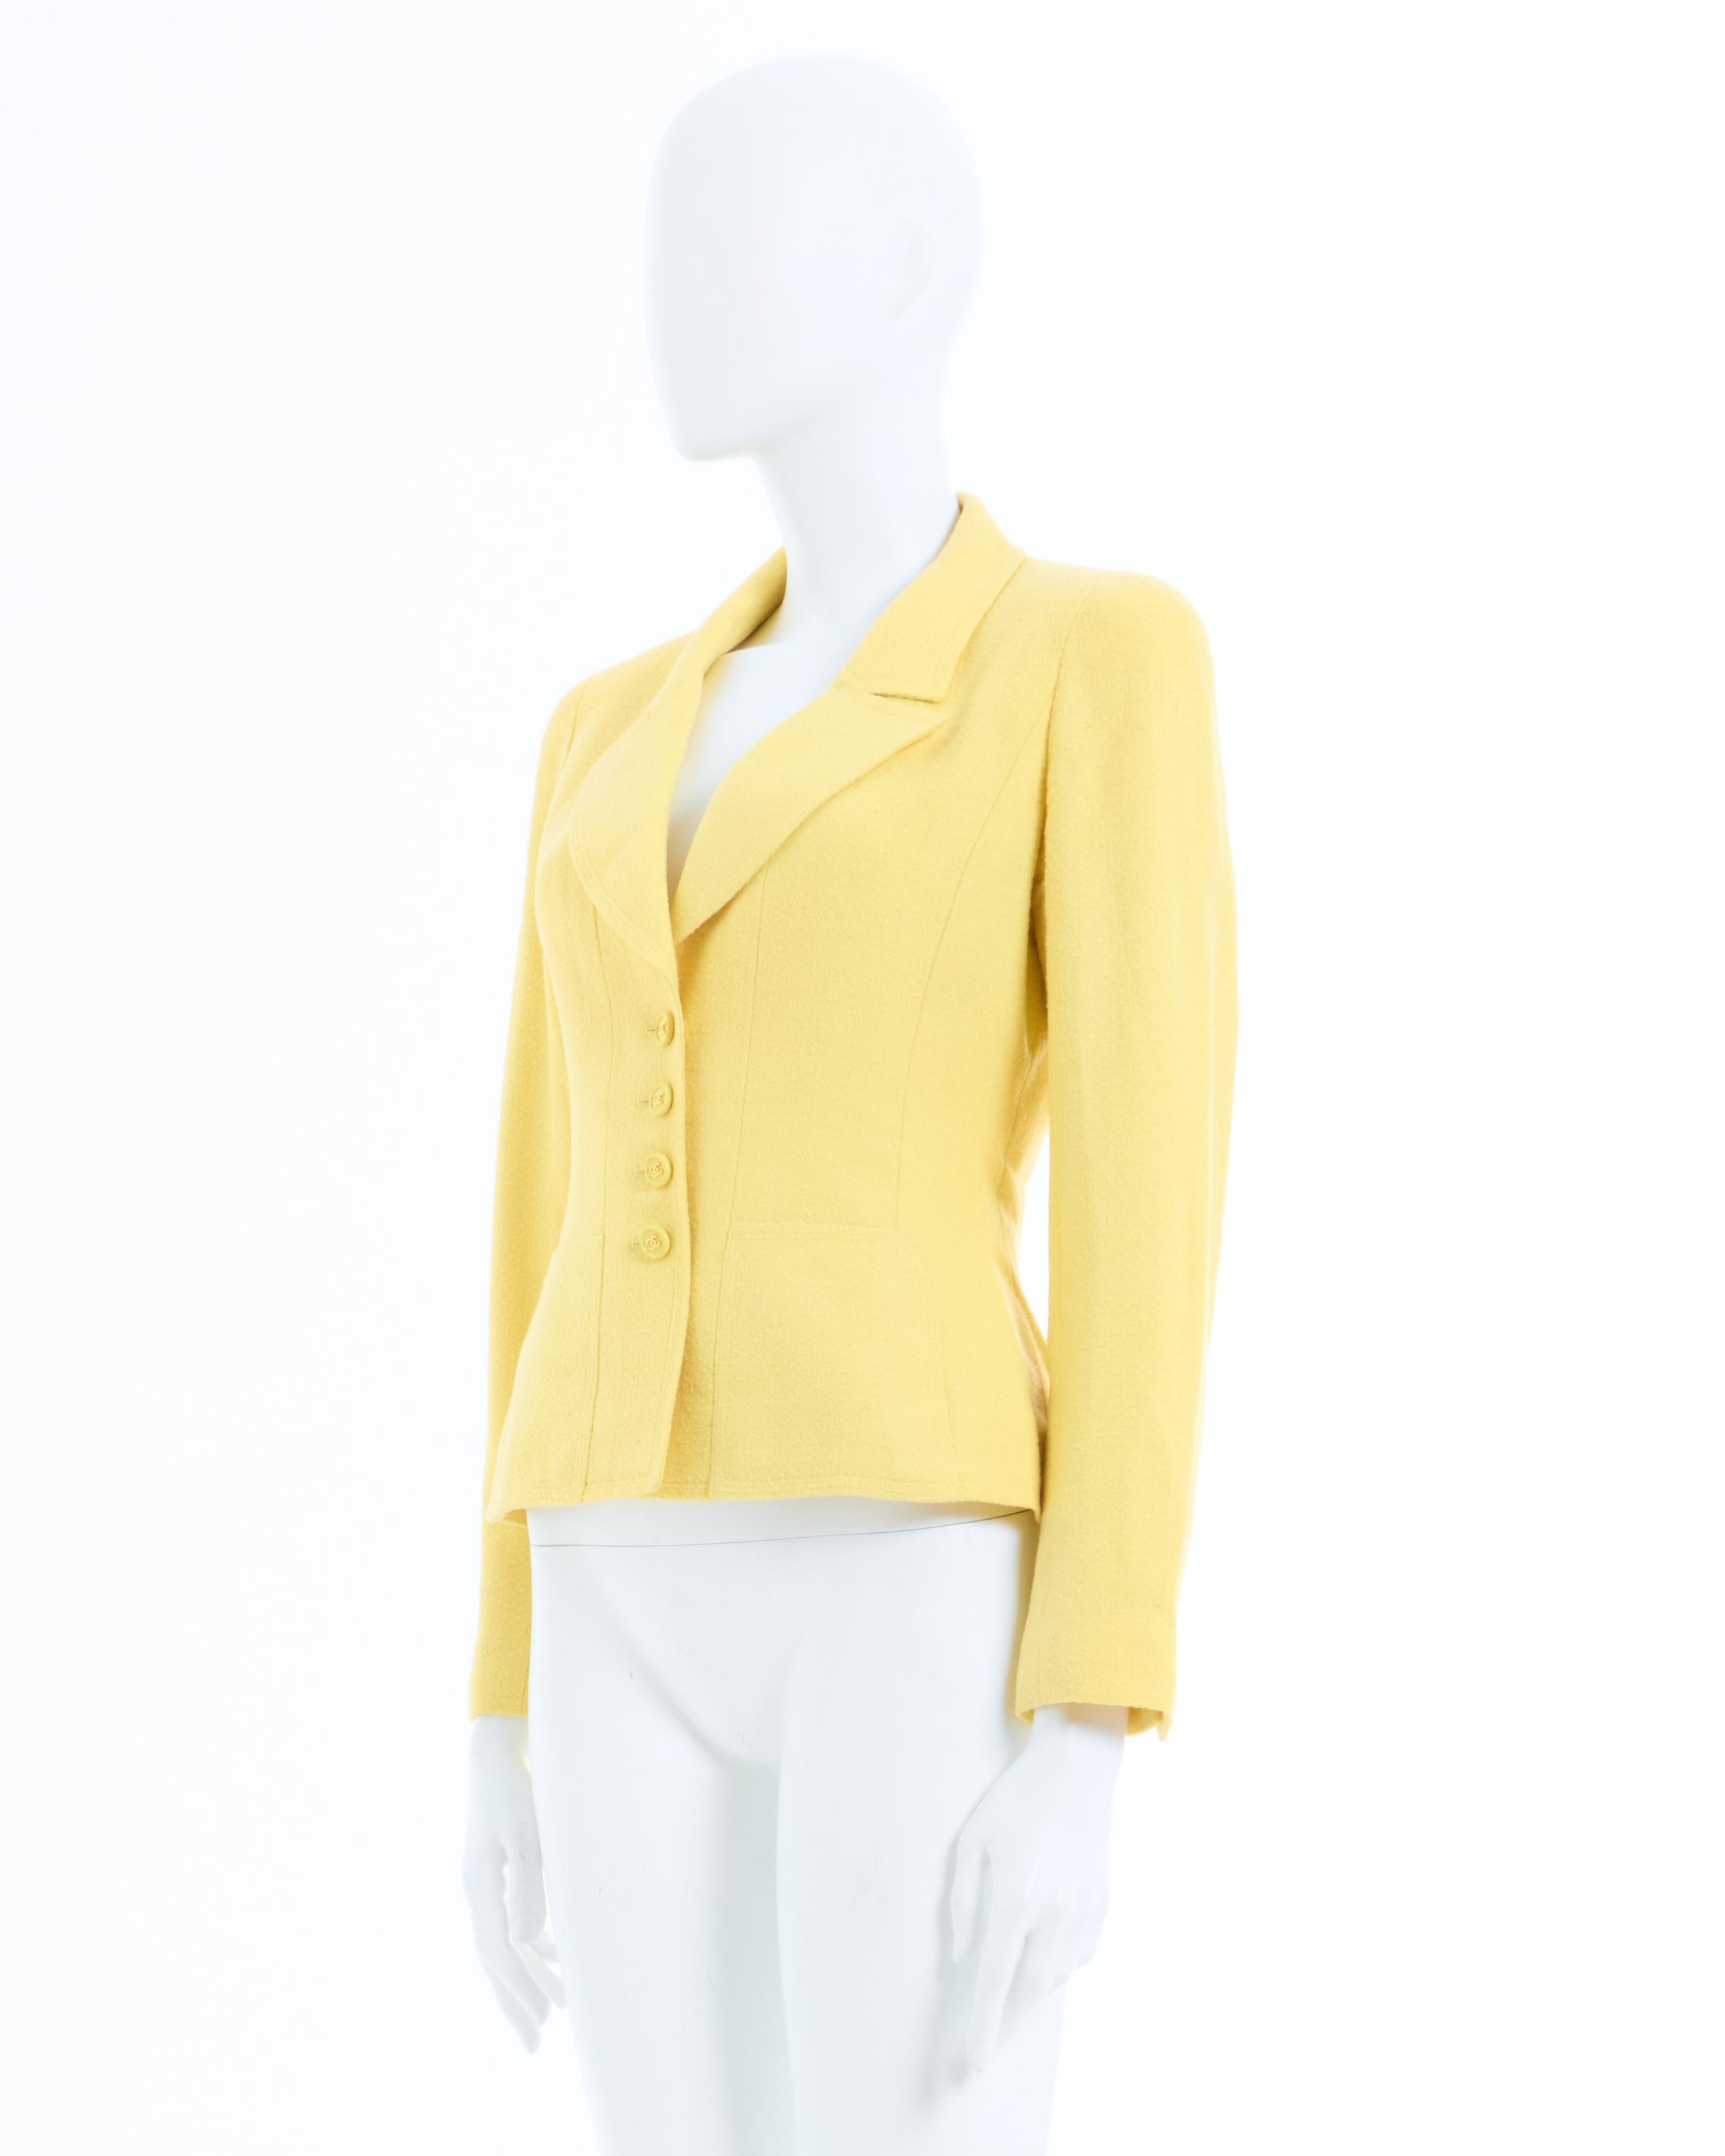 - Chanel Yellow cotton jacket 
- Sold by Skof.Archive 
- Spring-Summer 1997 
- Designed by Karl Lagerfeld 
- Matching yellow Silky lined 
- The jacket has matching tonal CC buttons on the front as well as on the cuffs 
- Two front flap pockets 
-